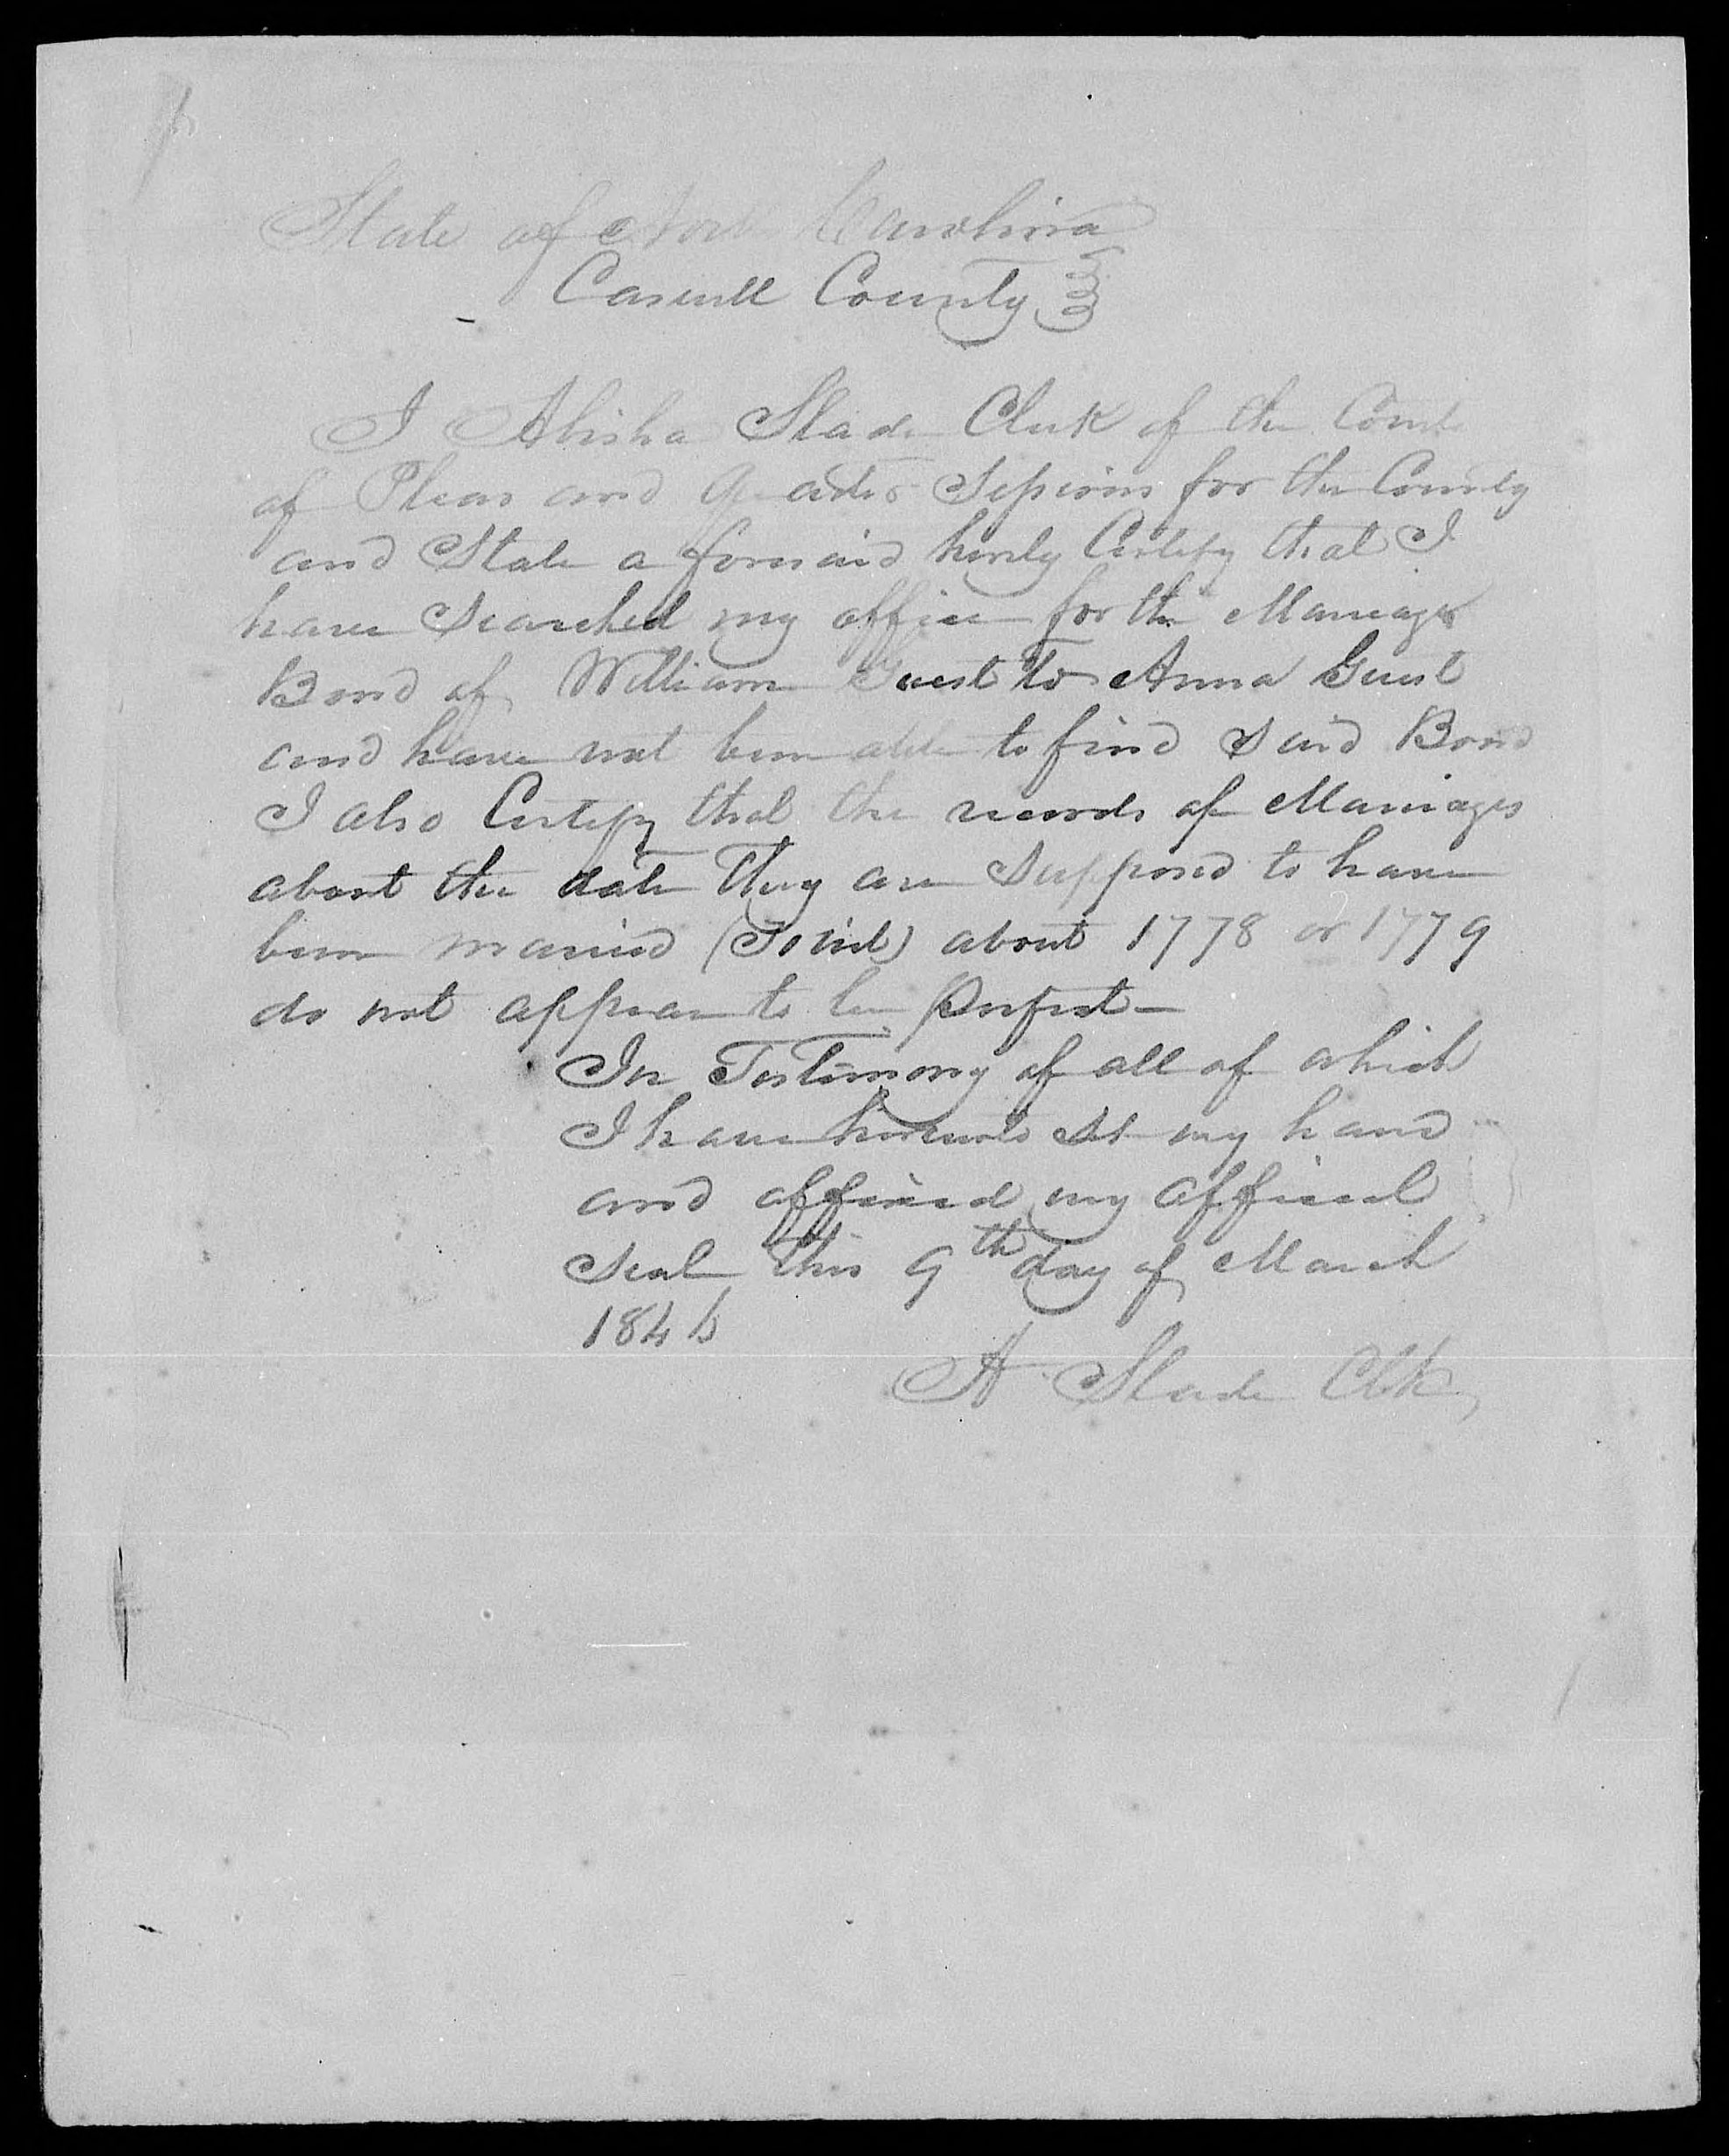 Proof of Marriage for William Guest and Anna Allen, 9 March 1846